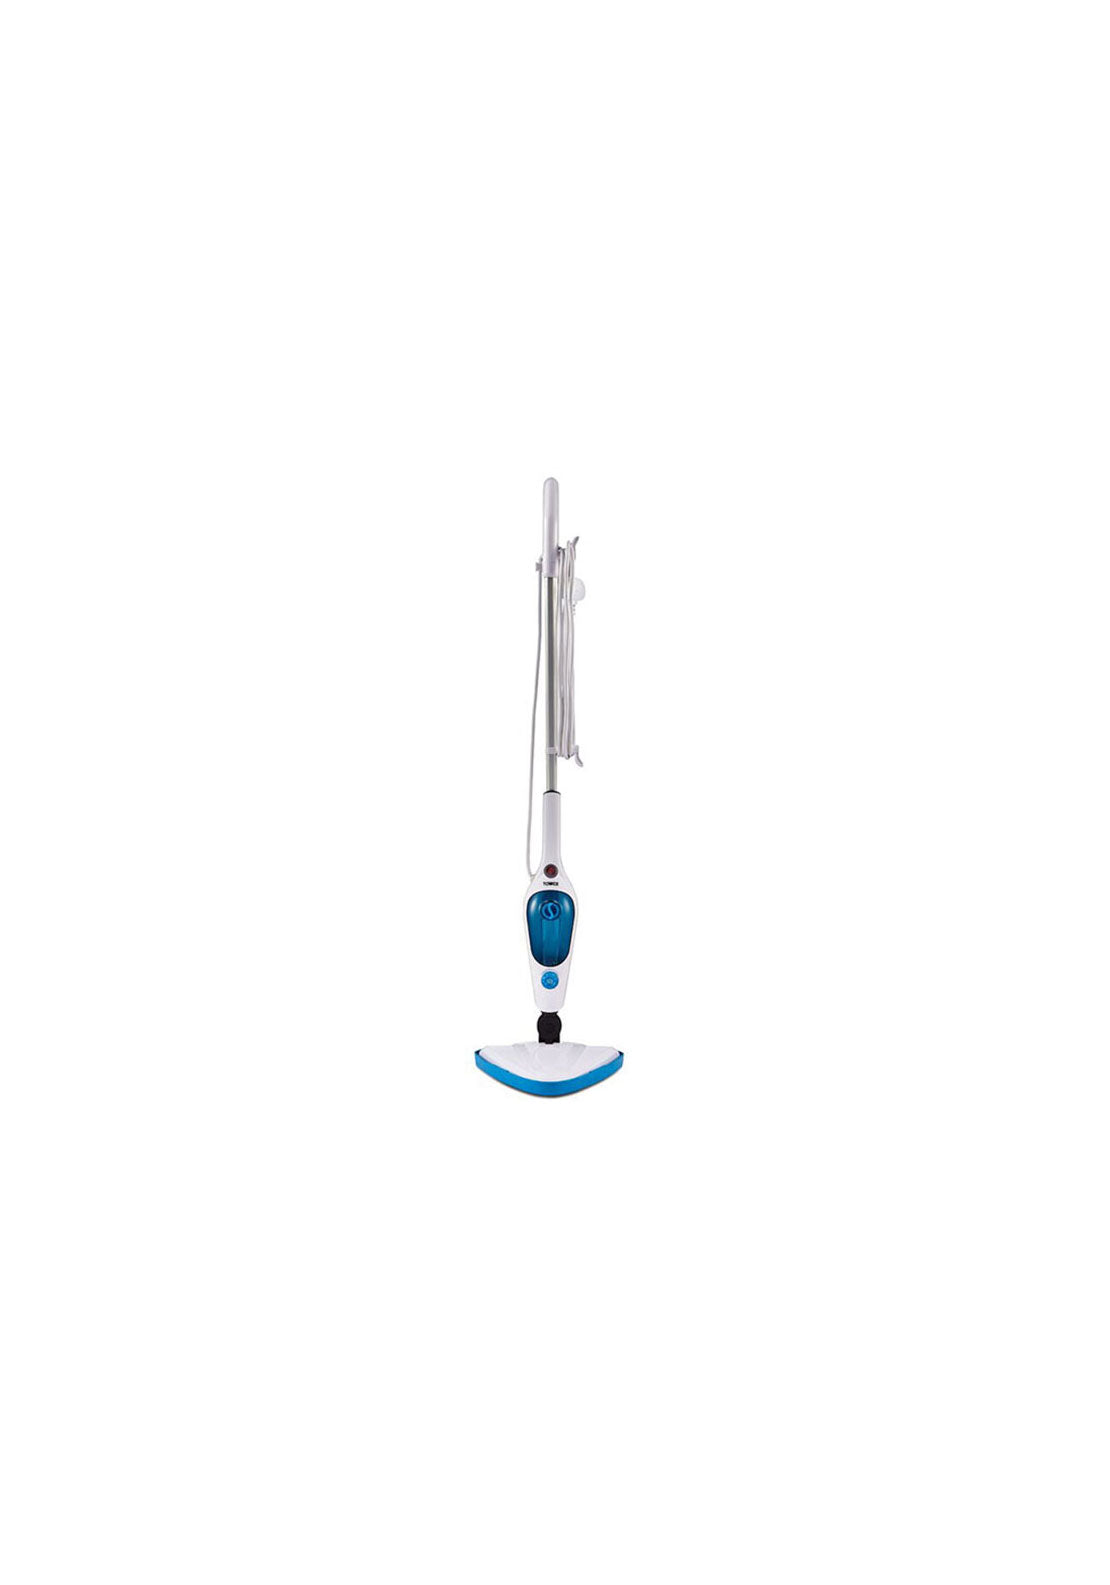 Tower TSM16 Multi-Functional Steam Mop | T132002 1 Shaws Department Stores